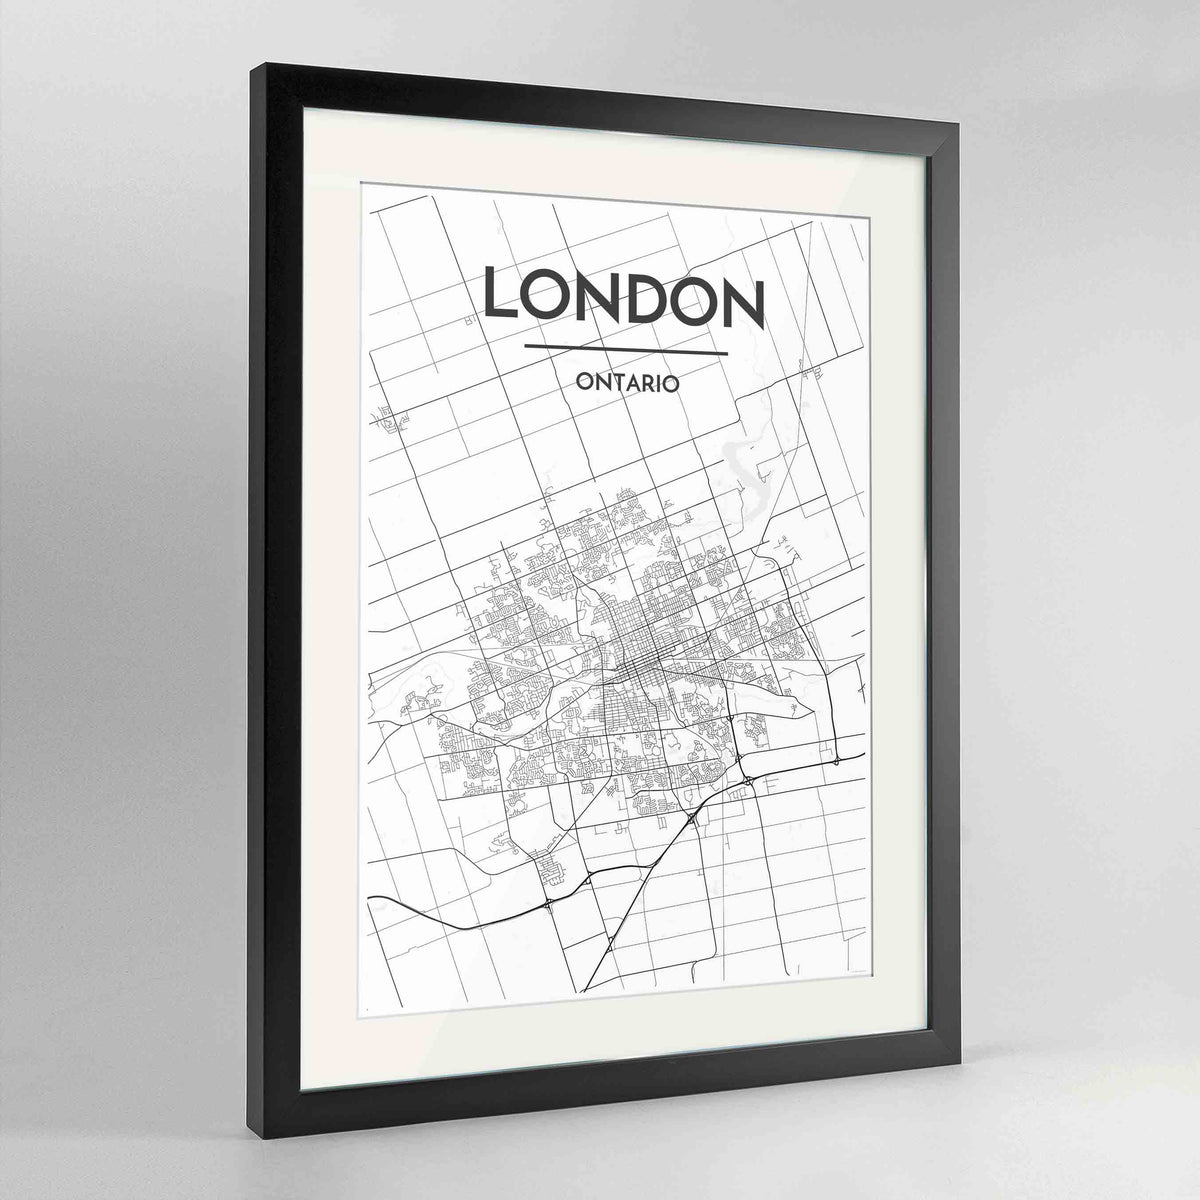 Framed London Ontario City Map 24x36&quot; Contemporary Black frame Point Two Design Group